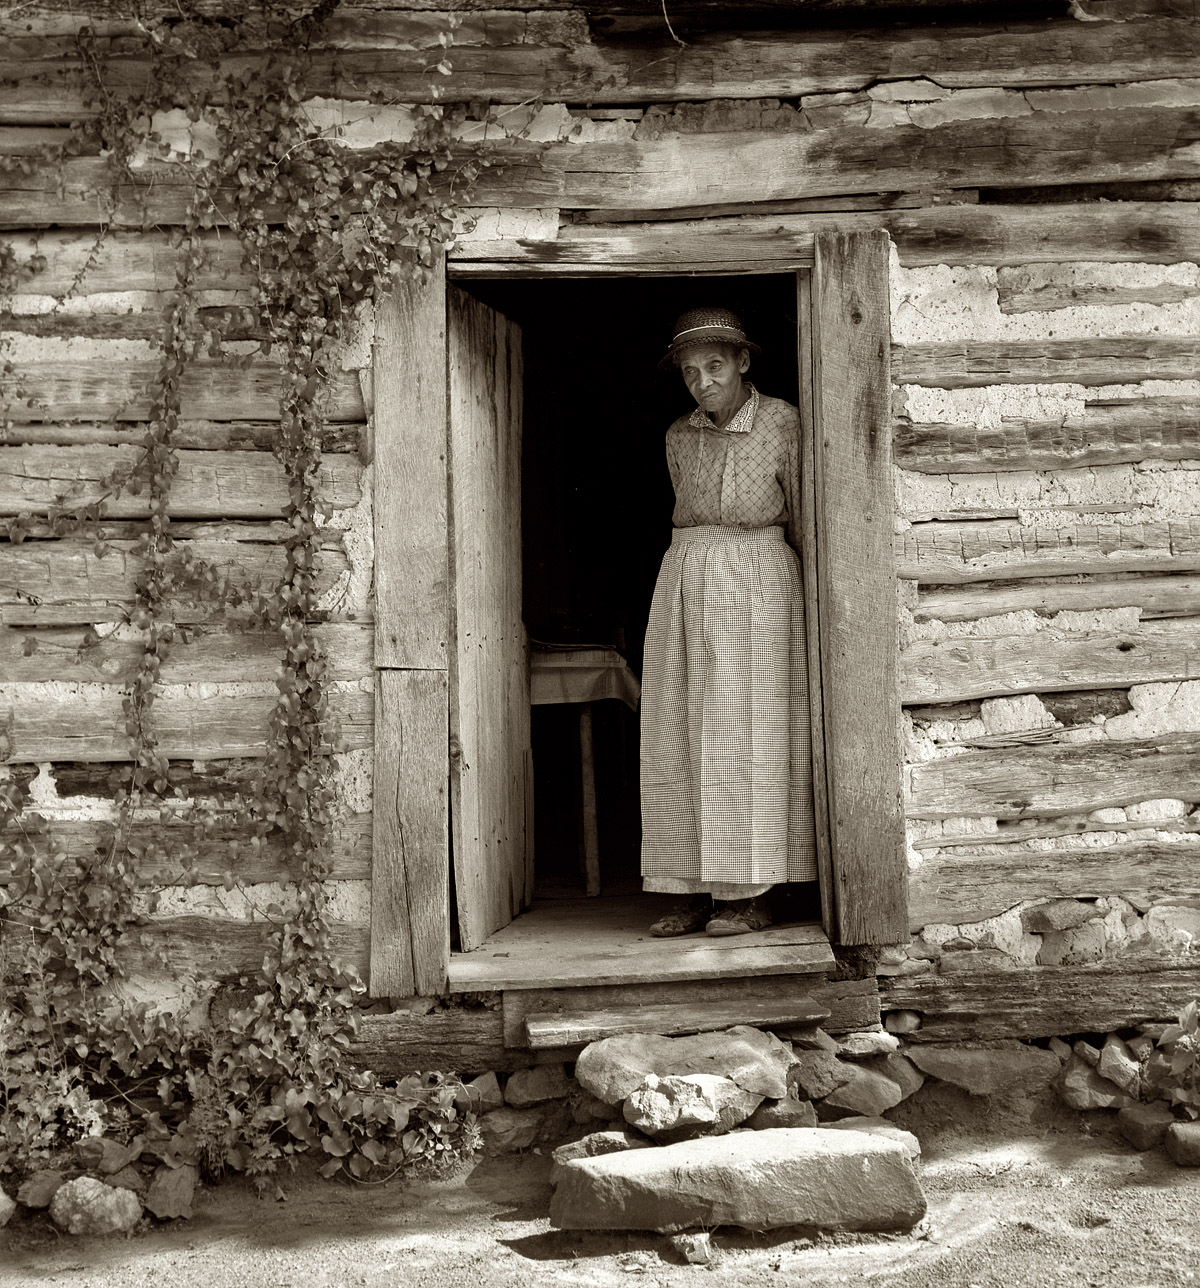 July 1939. Caroline Atwater standing in the kitchen door of her log house. Orange County, North Carolina. View full size. Medium-format nitrate negative by Dorothea Lange for the Farm Security Administration.